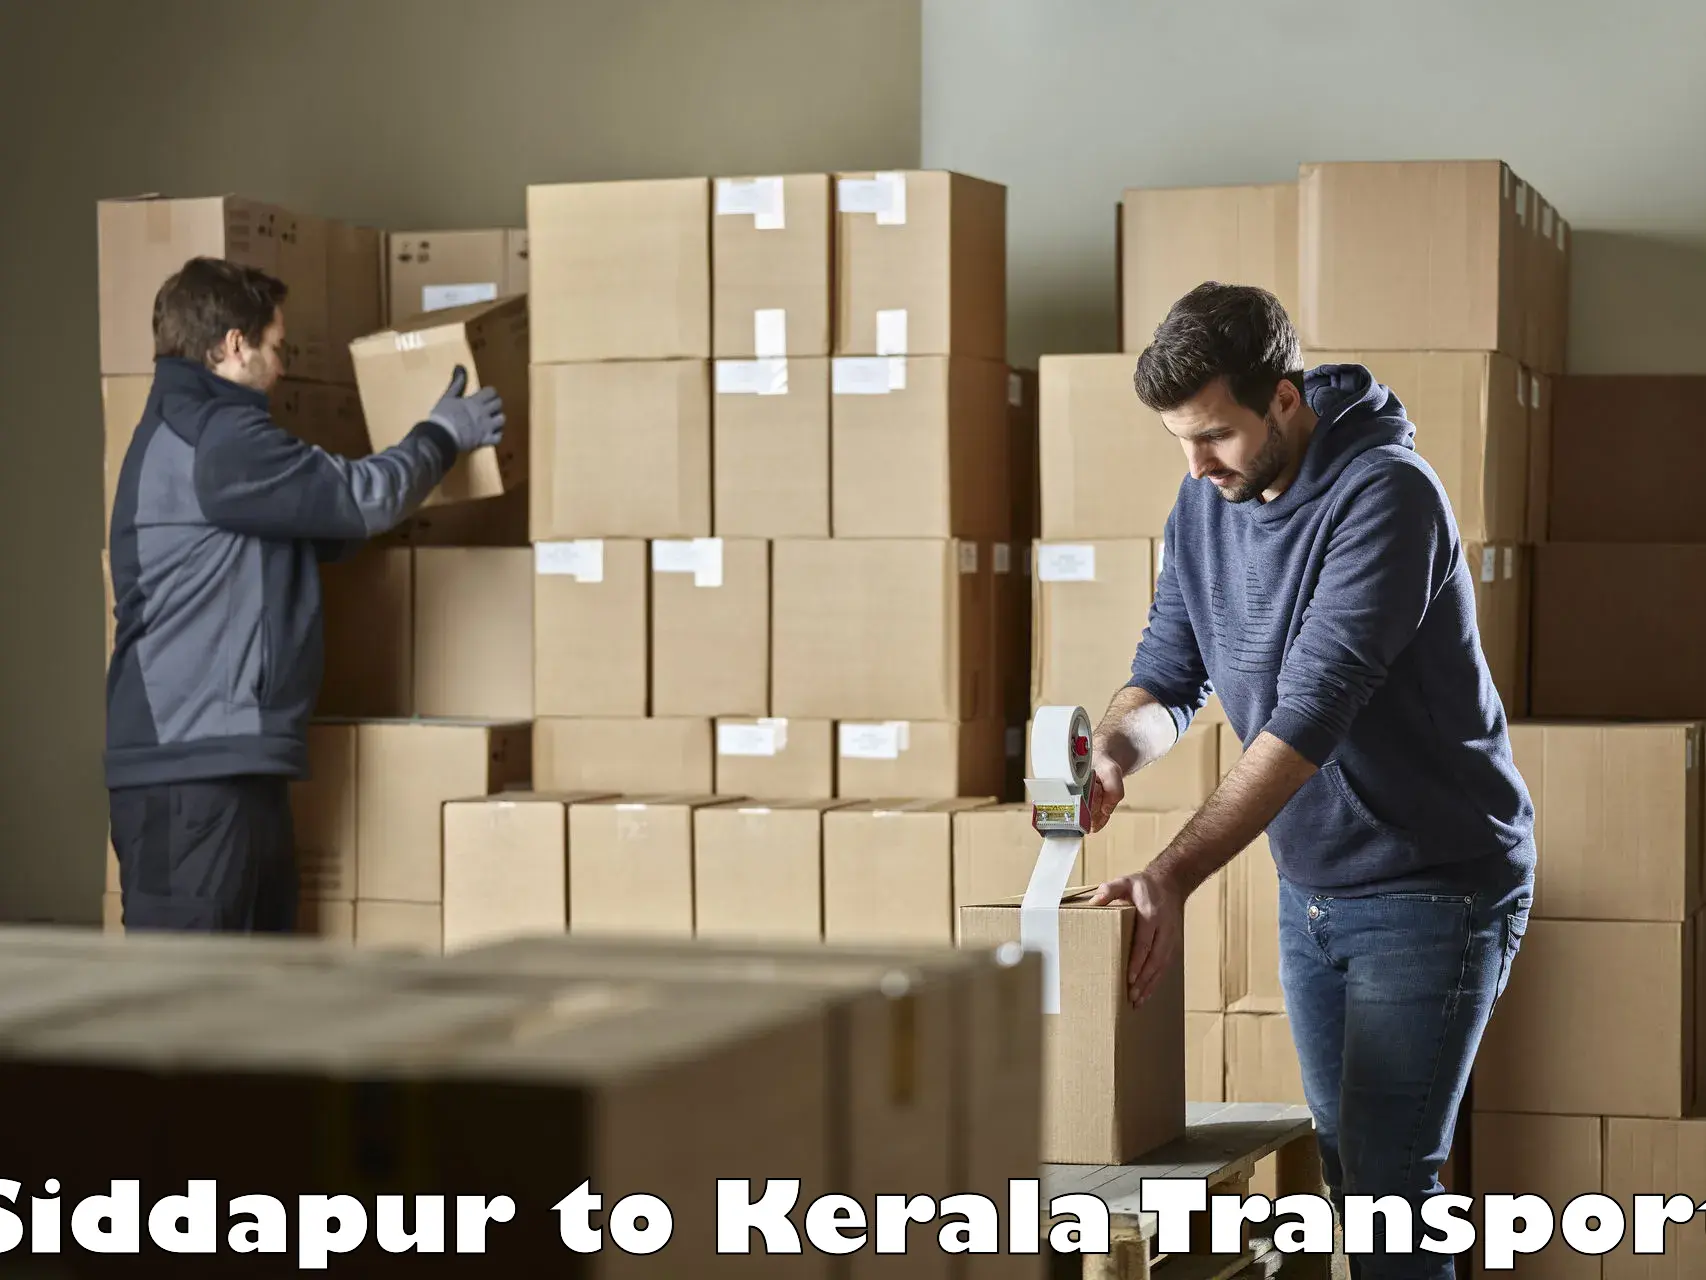 Container transport service Siddapur to Kalluvathukkal